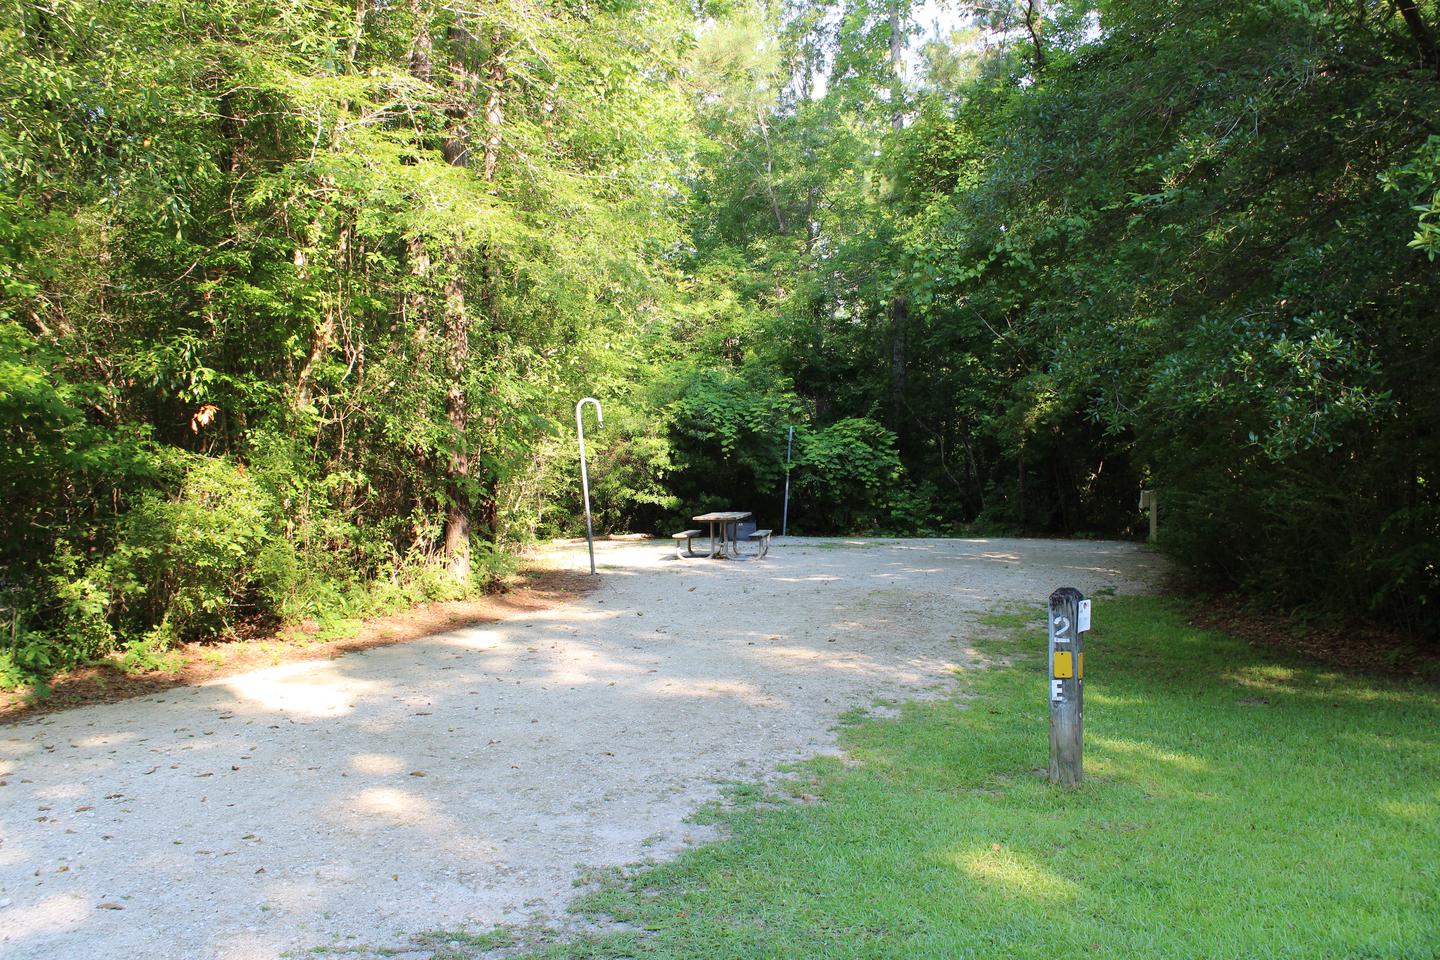 Flanners Beach Campsite #2.Driveway for Campsite